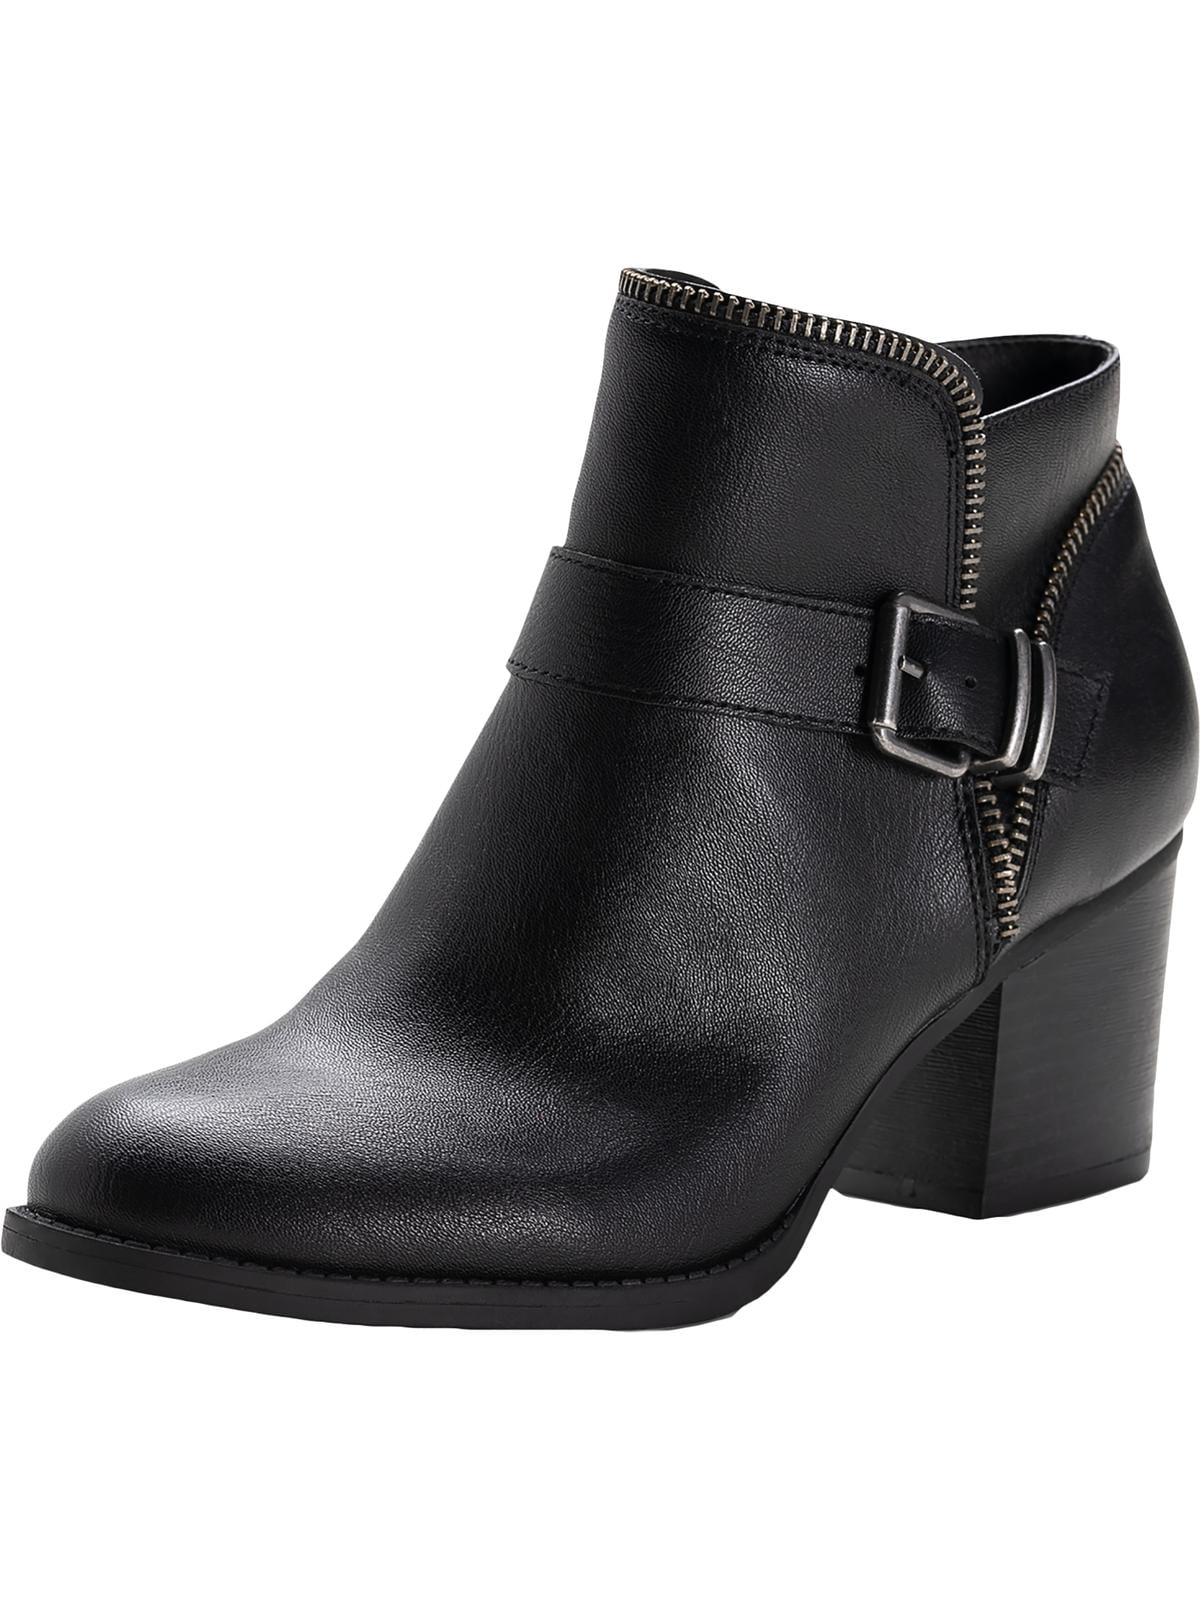 American Rag Womens Milly Faux Leather Booties Ankle Boots - Walmart.com